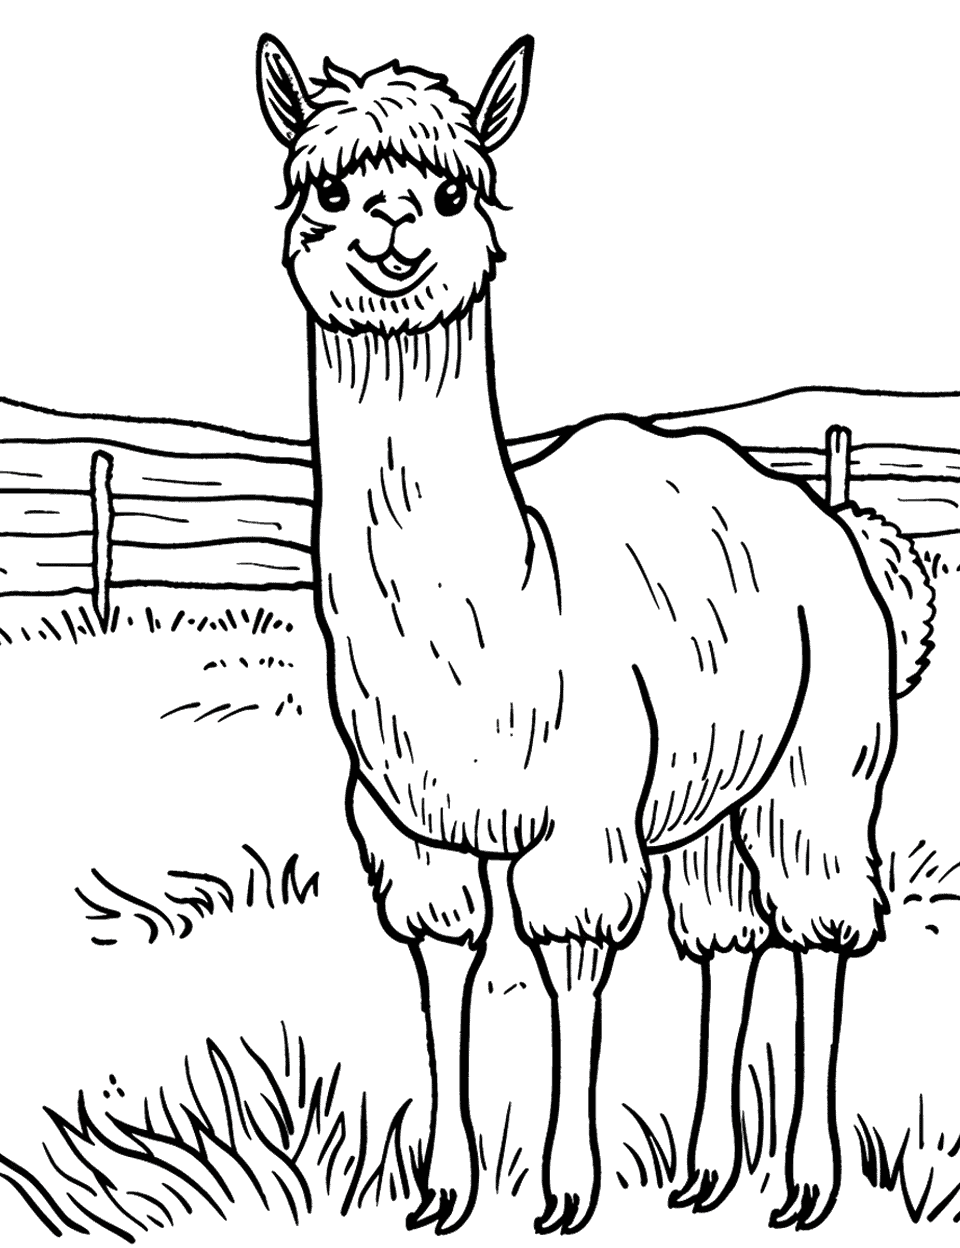 Alpaca Looking Curiously Farm Animal Coloring Page - An alpaca with a curious expression standing in a field with its head raised.